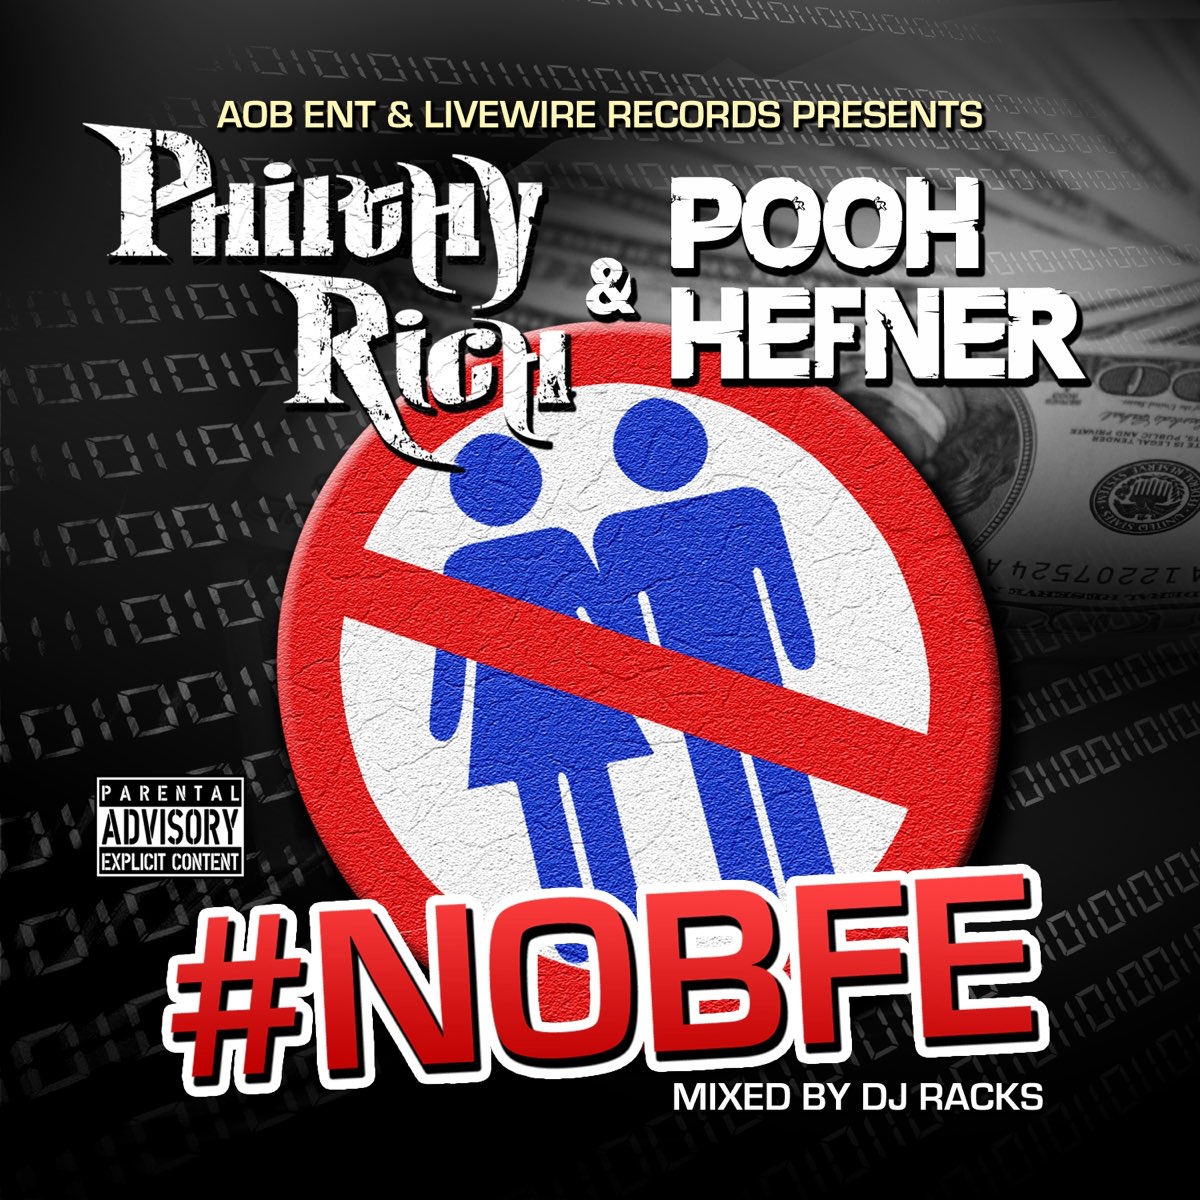 Pooh Hefner & Philthy Rich - AOB Ent And Livewire Records Present: #NOBFE